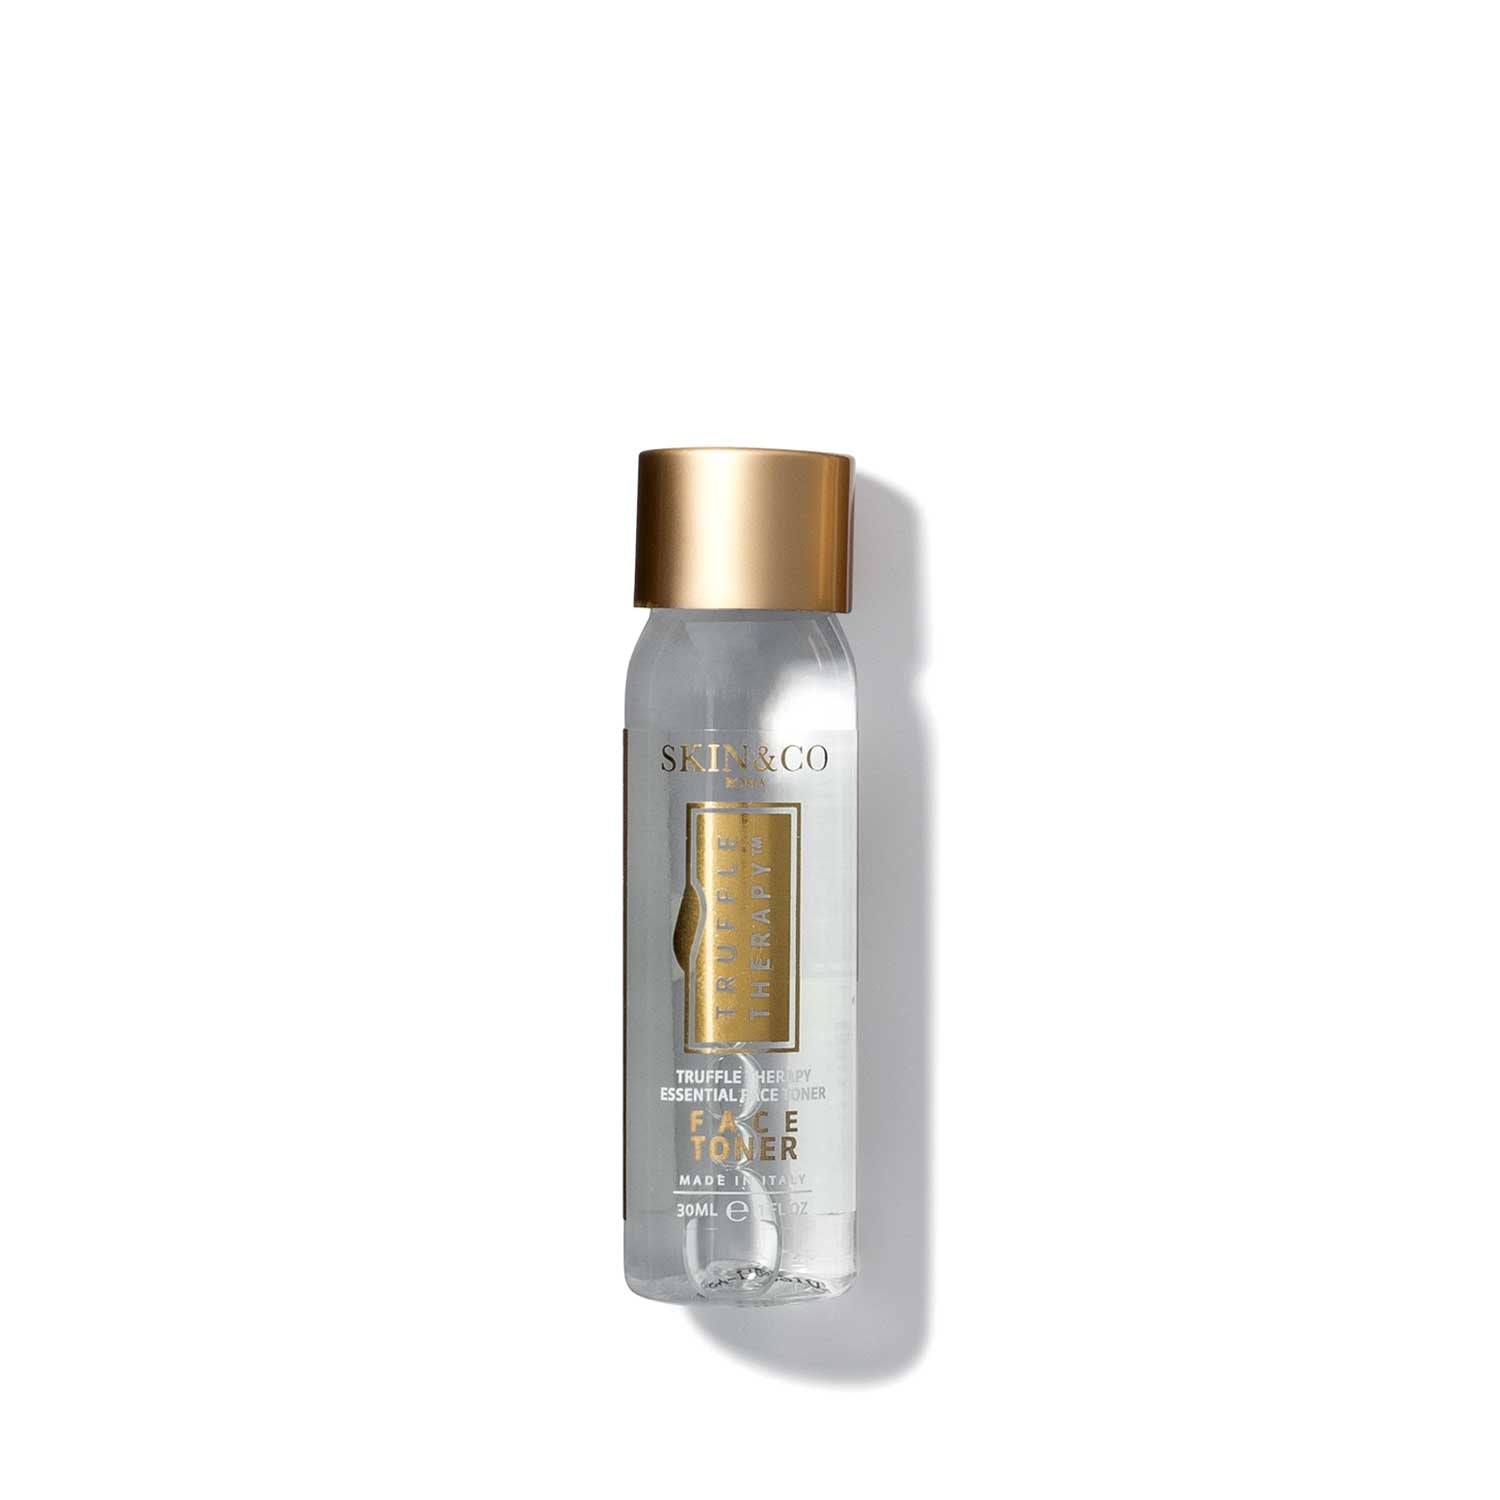 Truffle Therapy Face Toner Travel Deluxe Sample